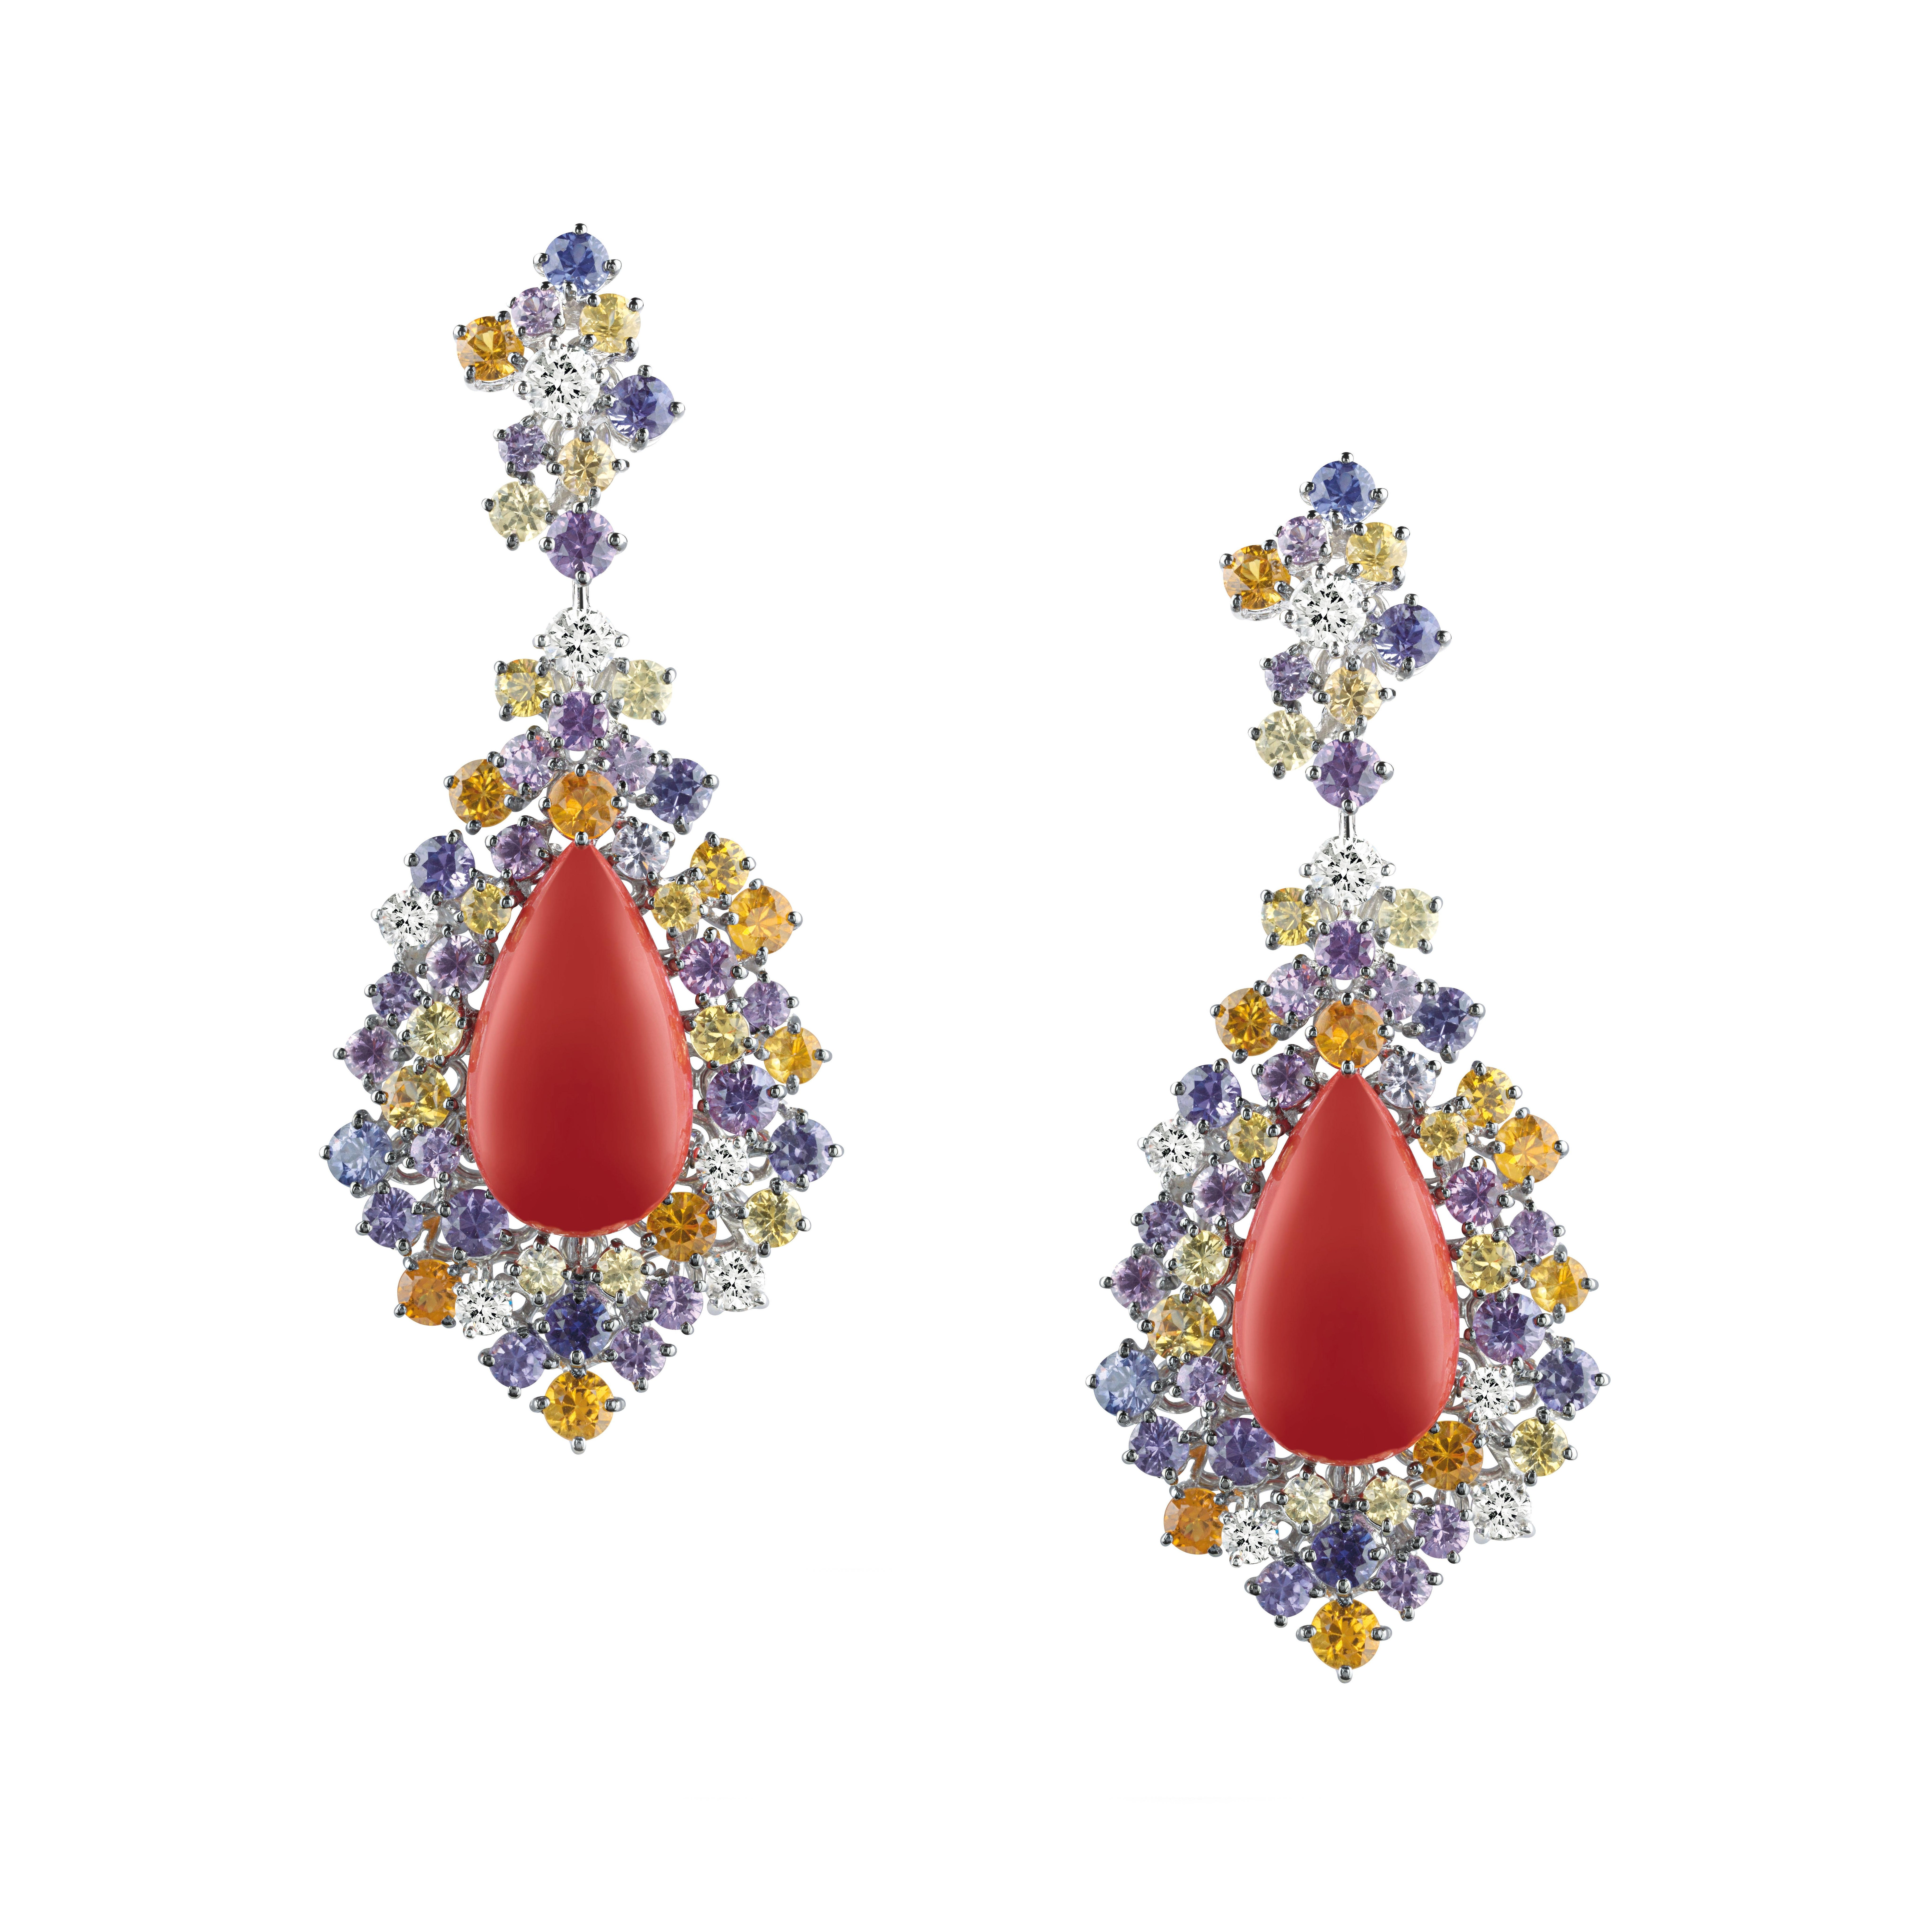 Earrings
Diamonds, sapphires, coral mounted on white Gold 18K.
Diamonds: 1.36 carat. Color G/H, clarity VVS/VS. Sapphires: 11.74 carats.
Coral: 18,10 carats.
Total weight: 33.50 grams.